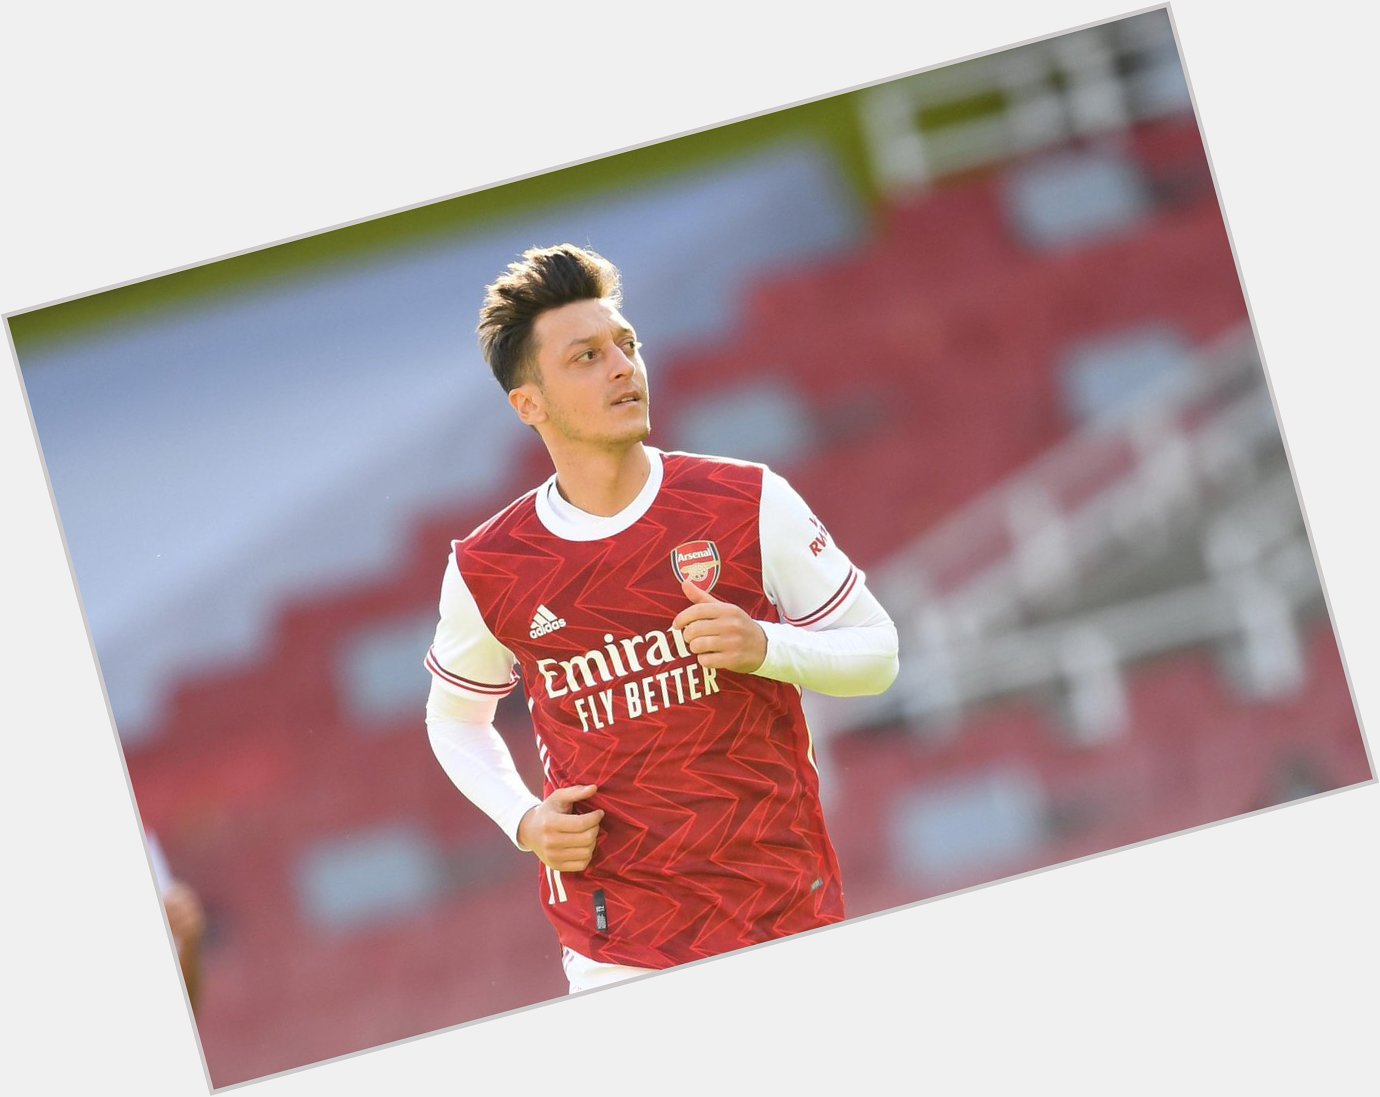 Happy birthday to Mesut Ozil, should he be involved with the team? 